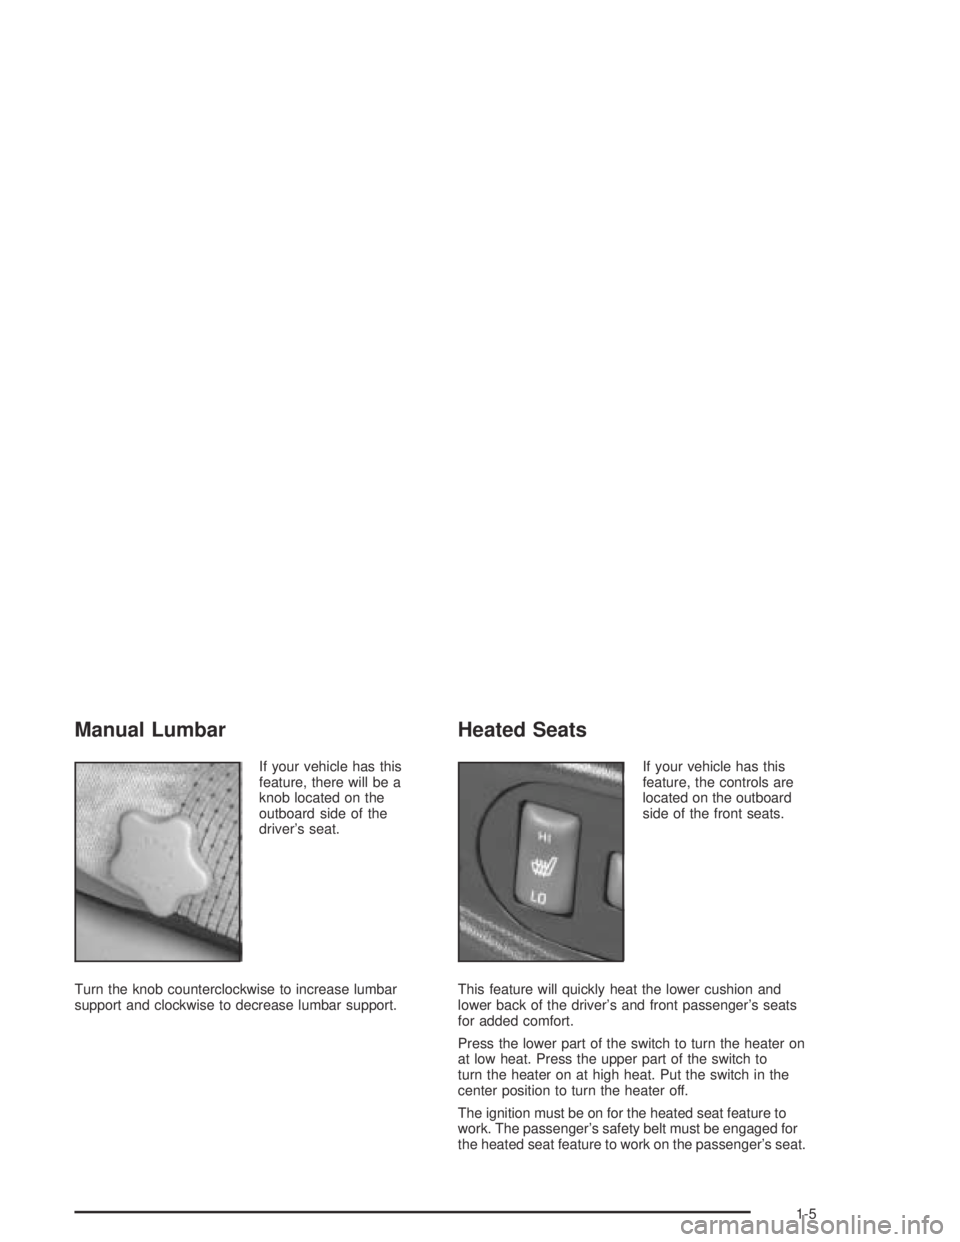 GMC CANYON 2005 User Guide Manual Lumbar
If your vehicle has this
feature, there will be a
knob located on the
outboard side of the
driver’s seat.
Turn the knob counterclockwise to increase lumbar
support and clockwise to dec